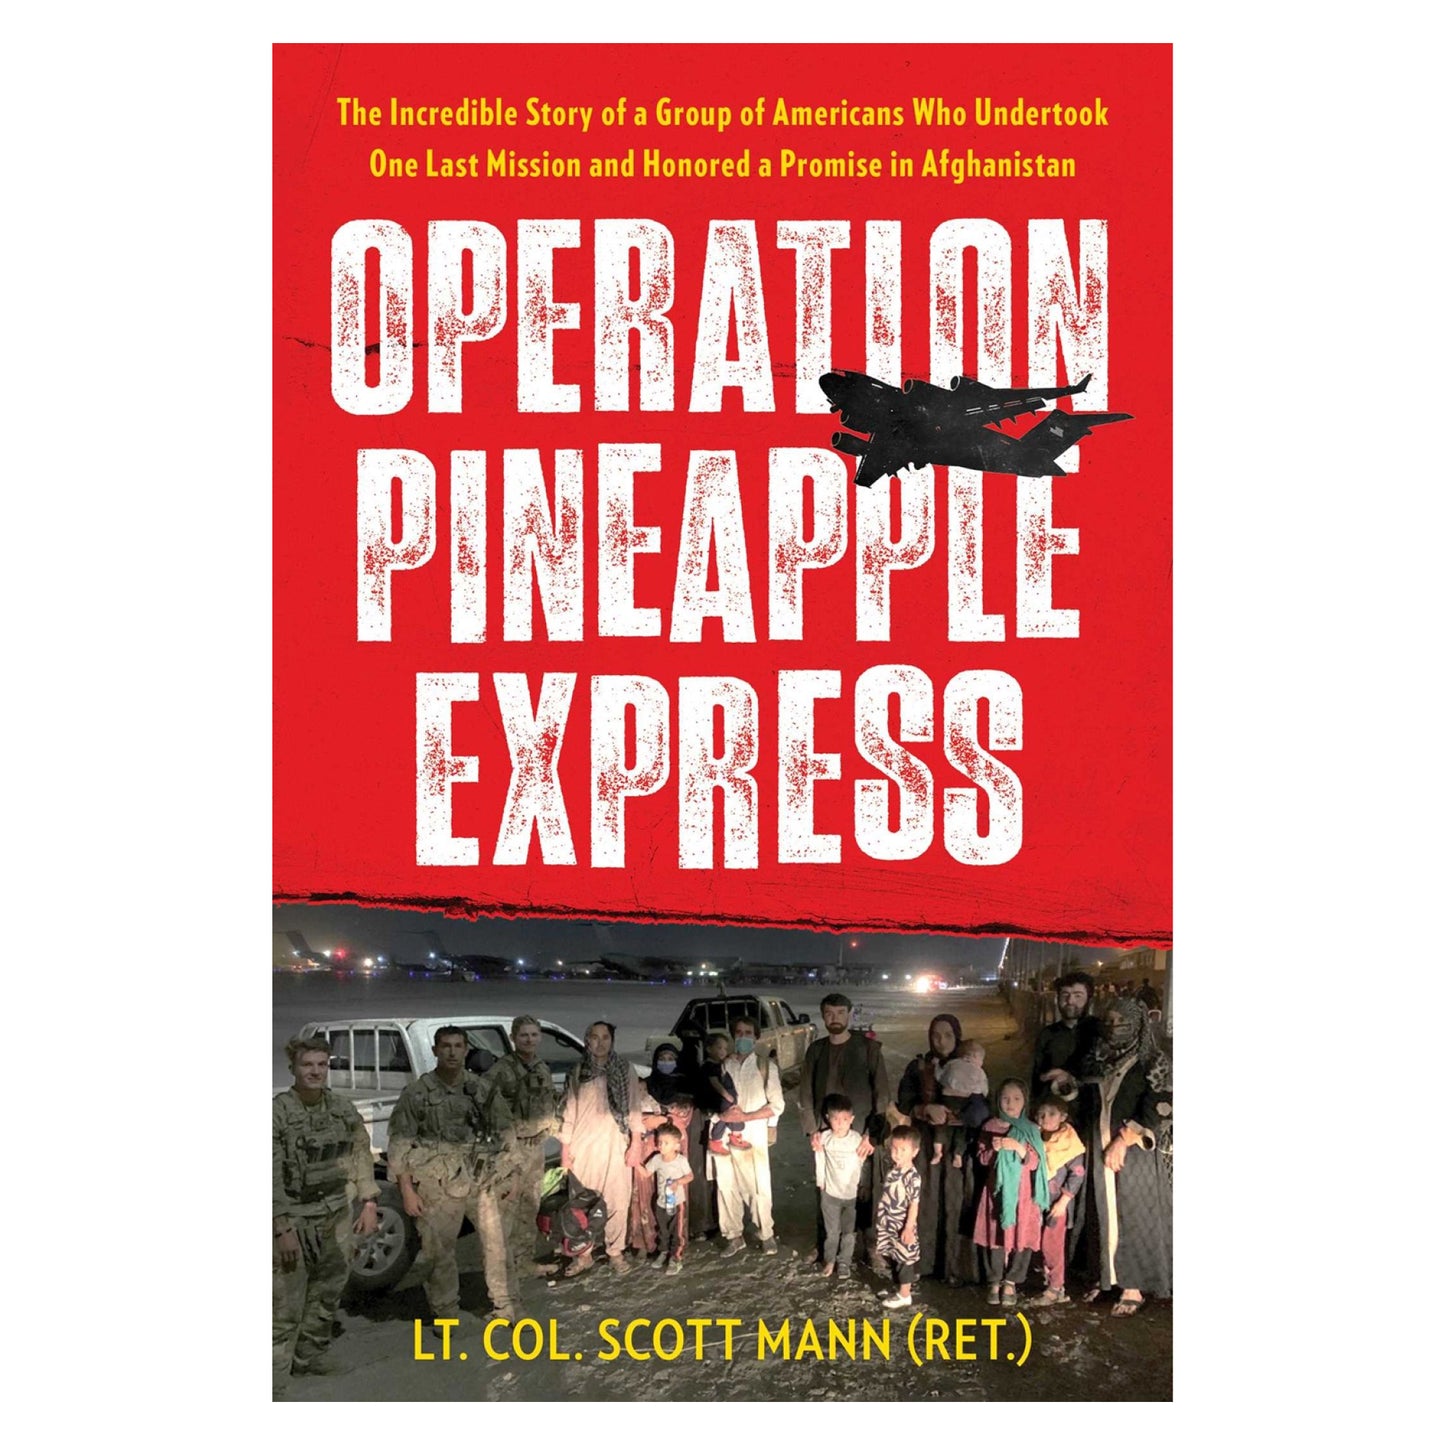 Operation Pineapple Express